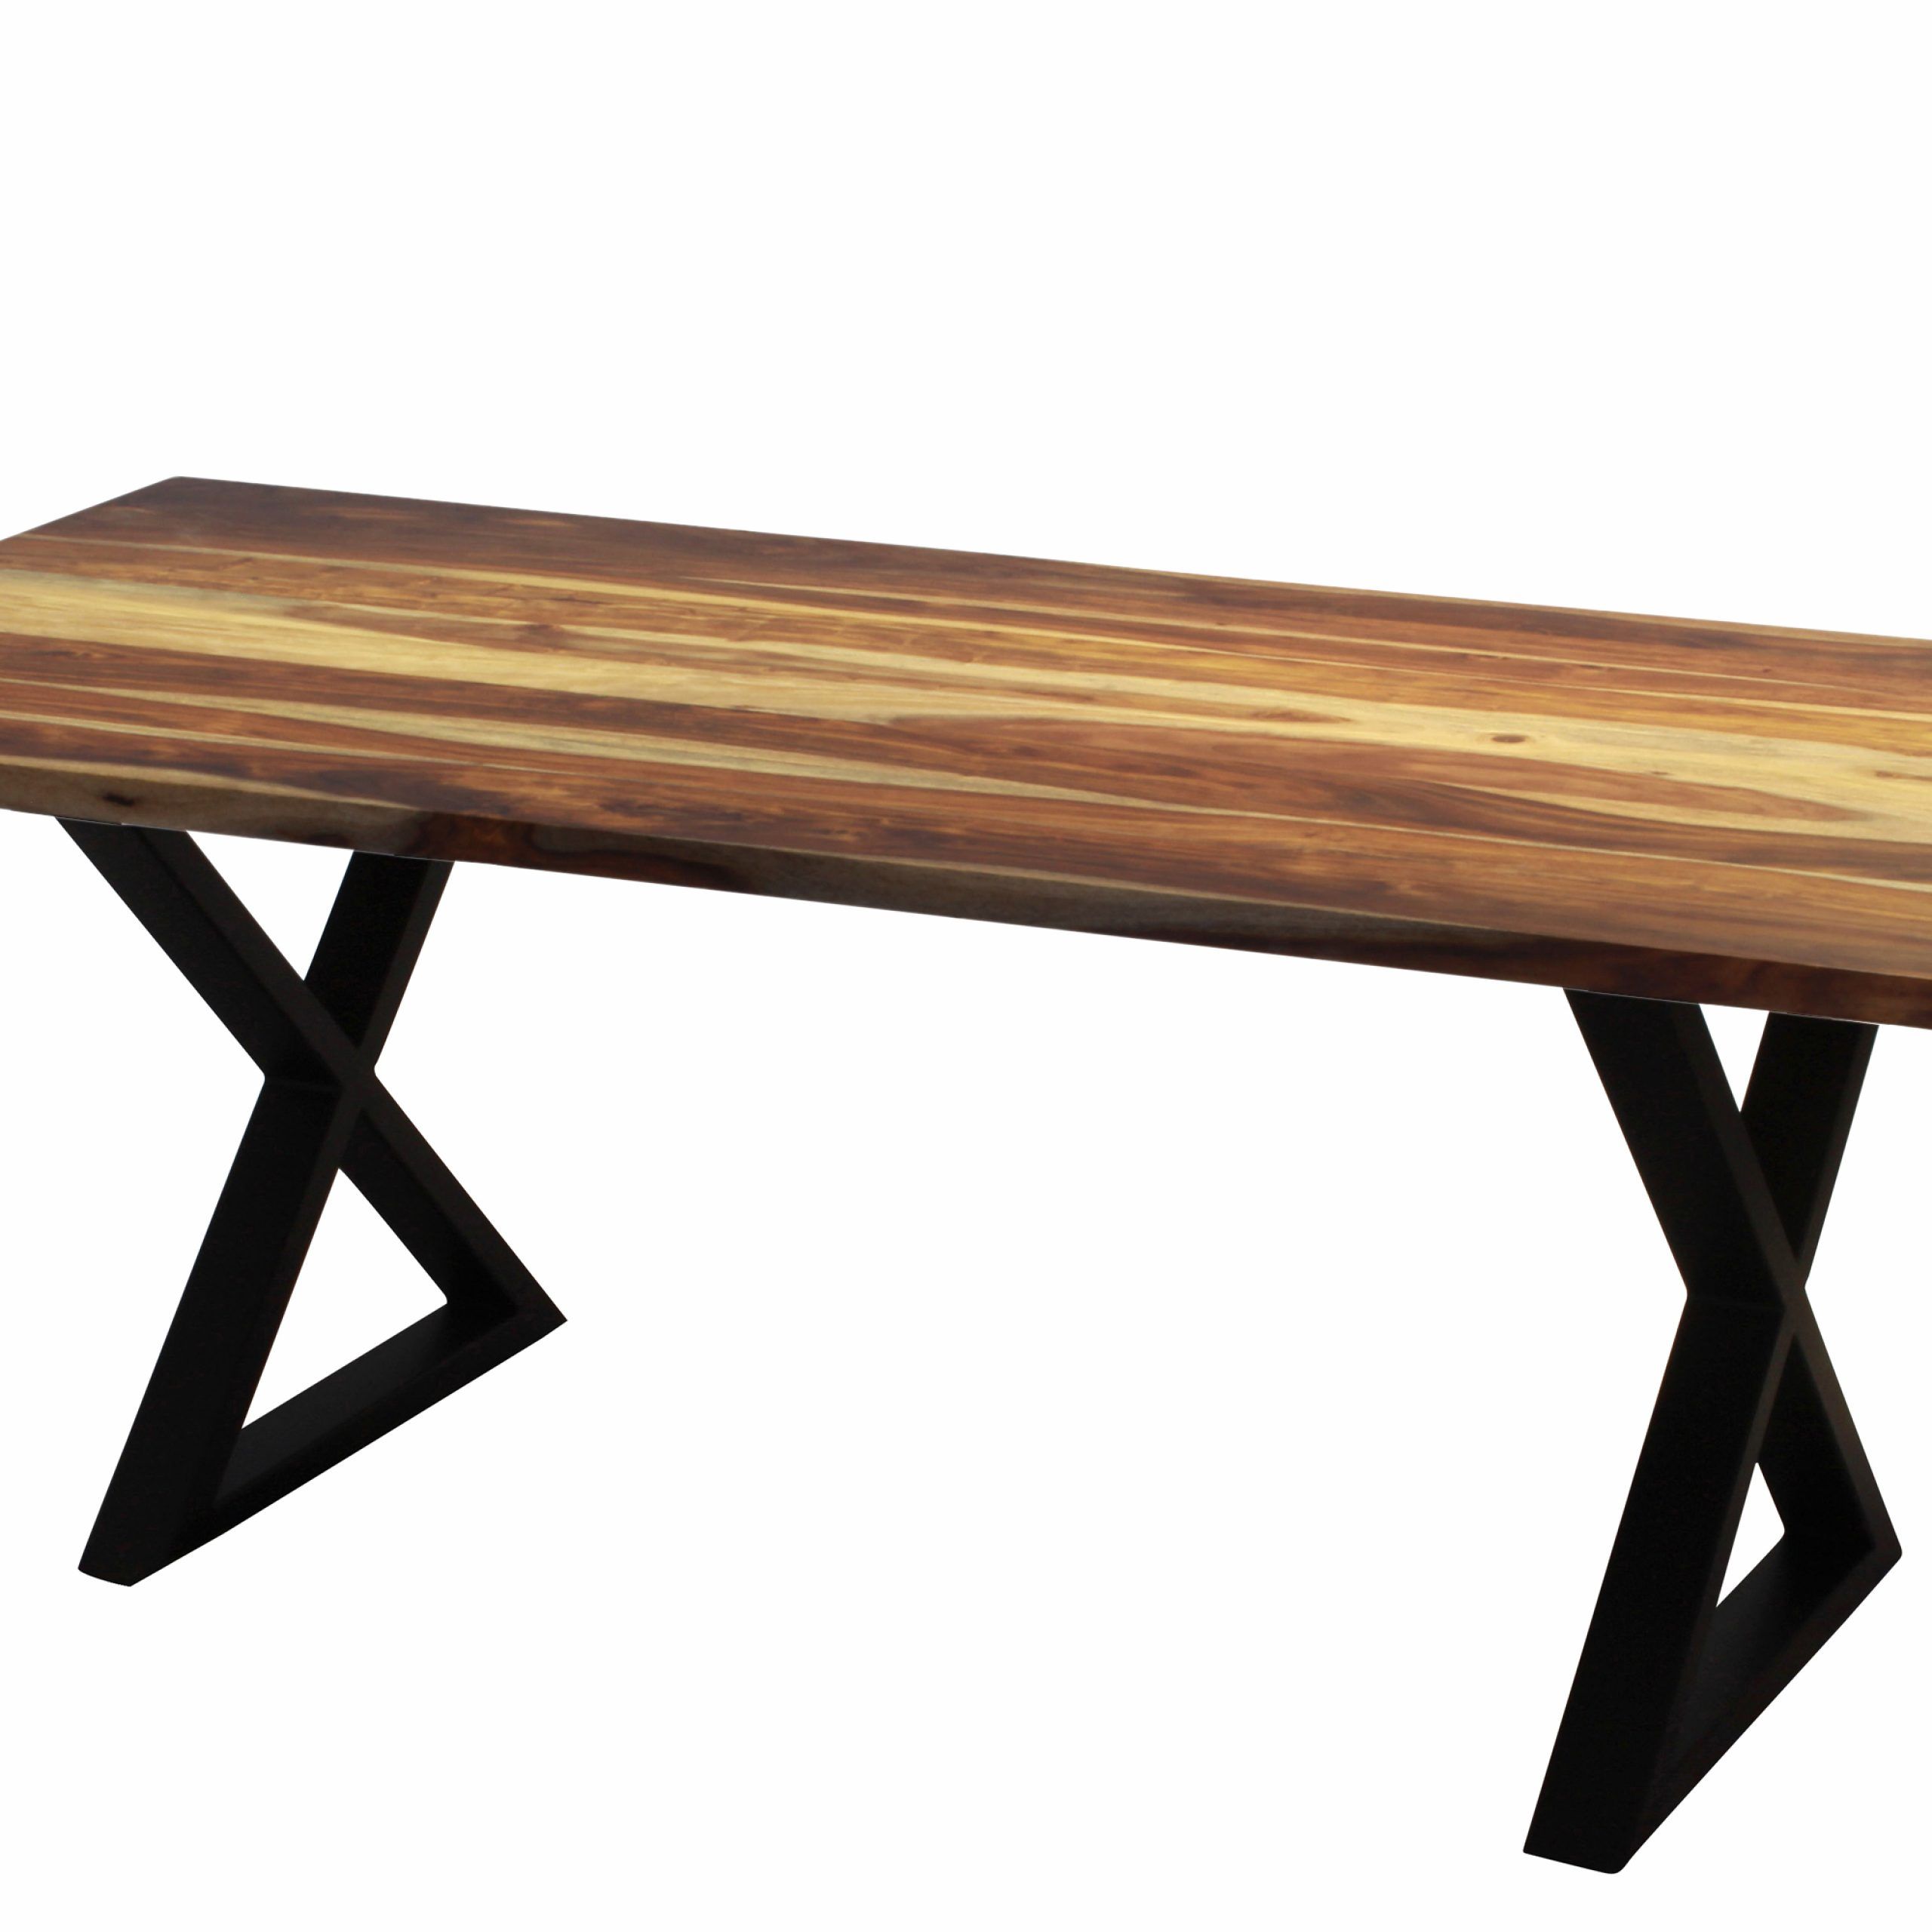 Most Popular Corcoran Acacia Live Edge Dining Table With Black Victor Legs – 96" With Regard To Acacia Dining Tables With Black Victor Legs (View 4 of 25)